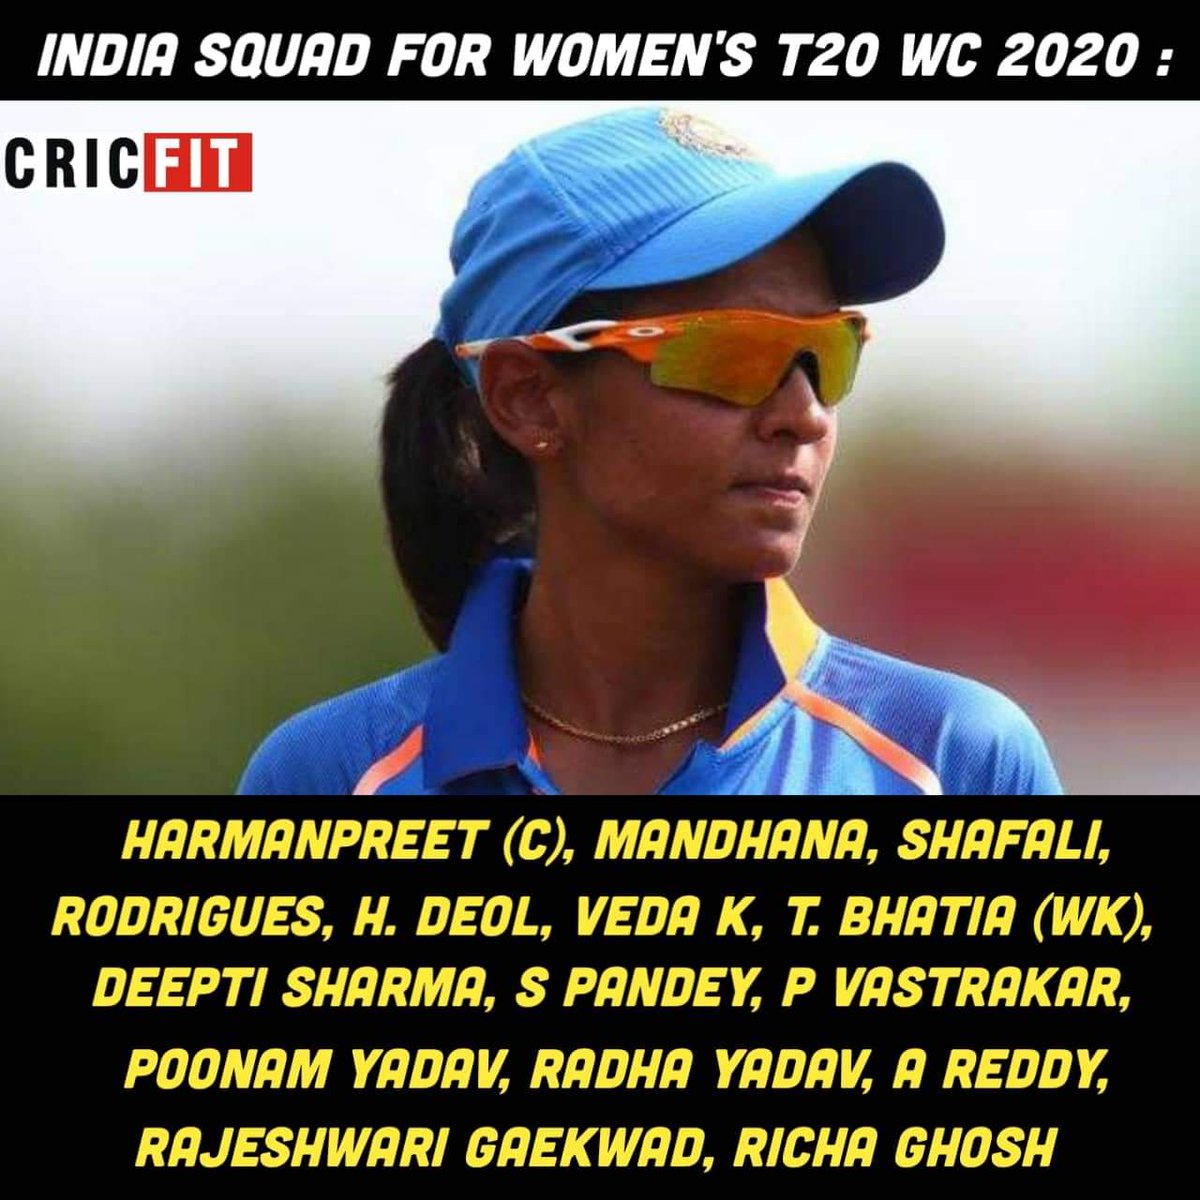 Indian Women's squad for T20I world Cup 2020

@BCCIWomen #IndianWomensCricketTeam #TeamIndia #T20worldcup